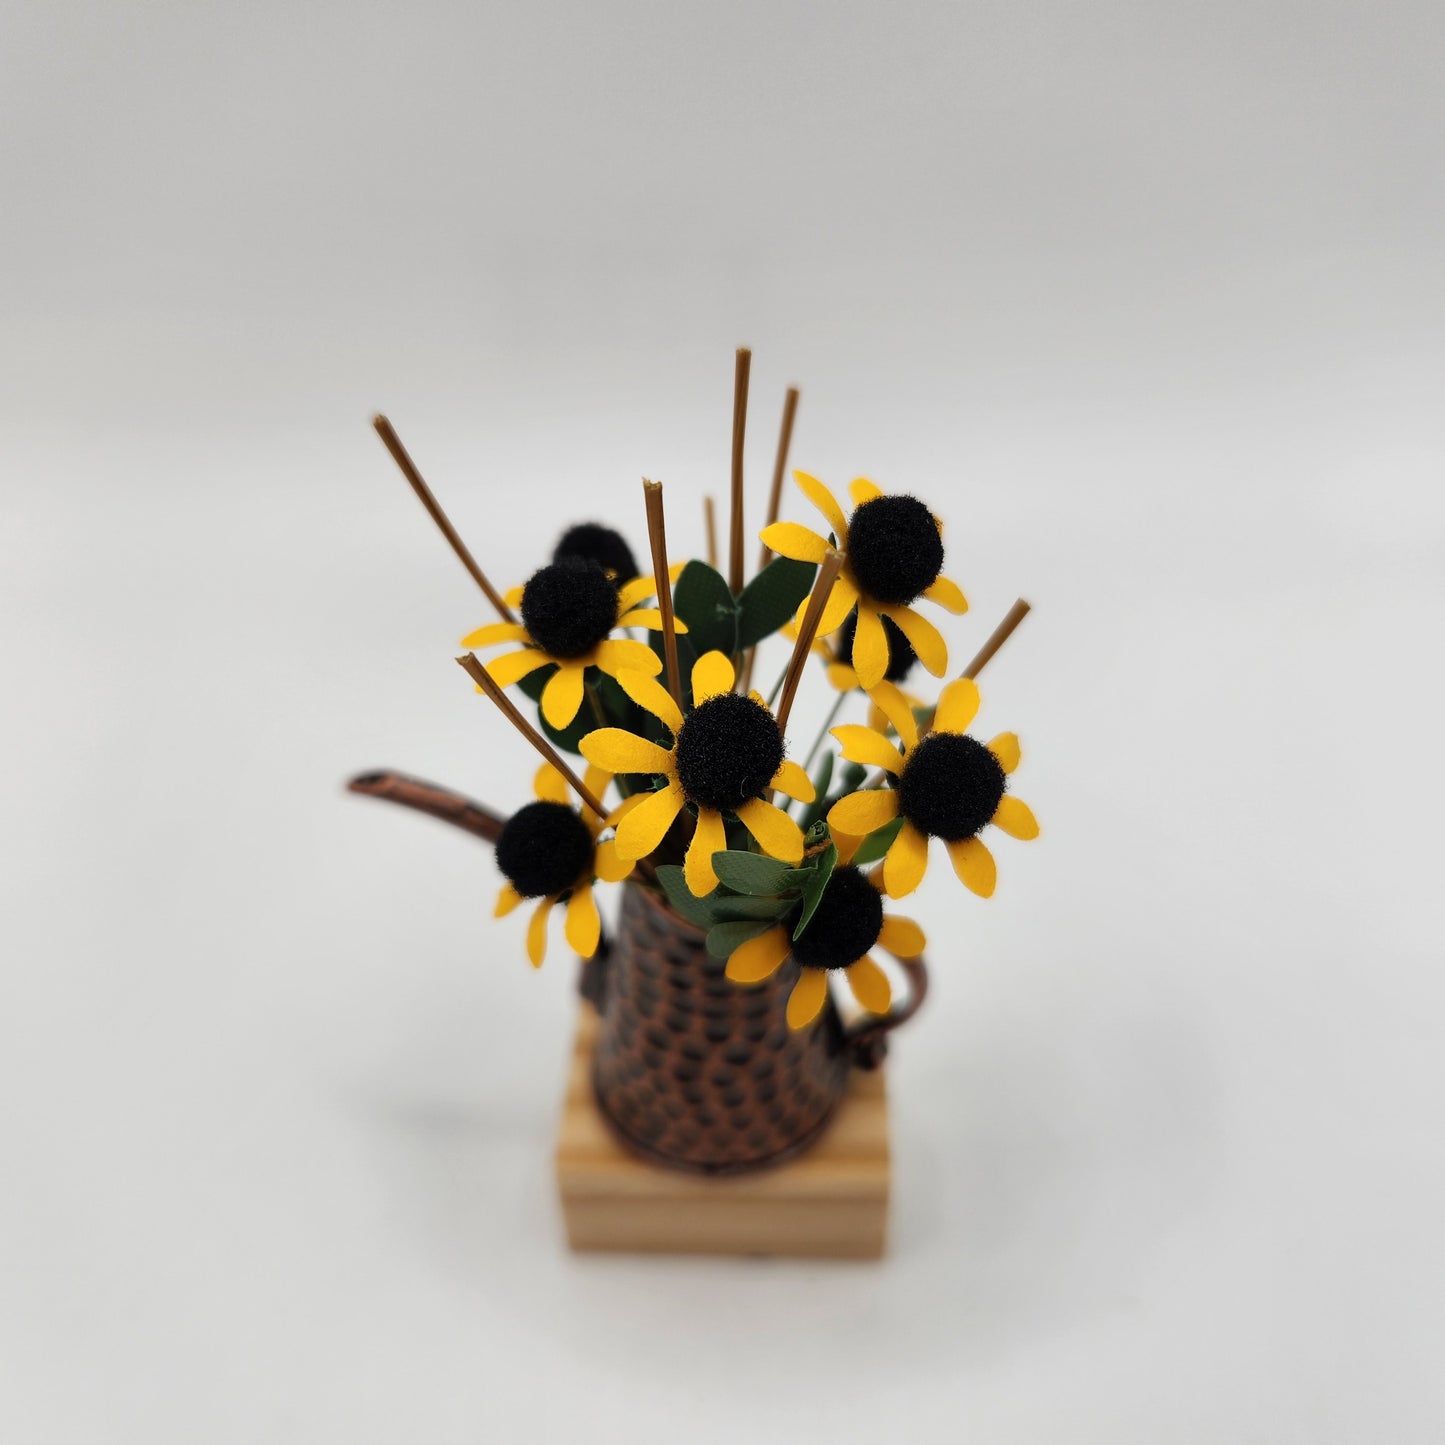 Black Eyed Susans filled Watering Can